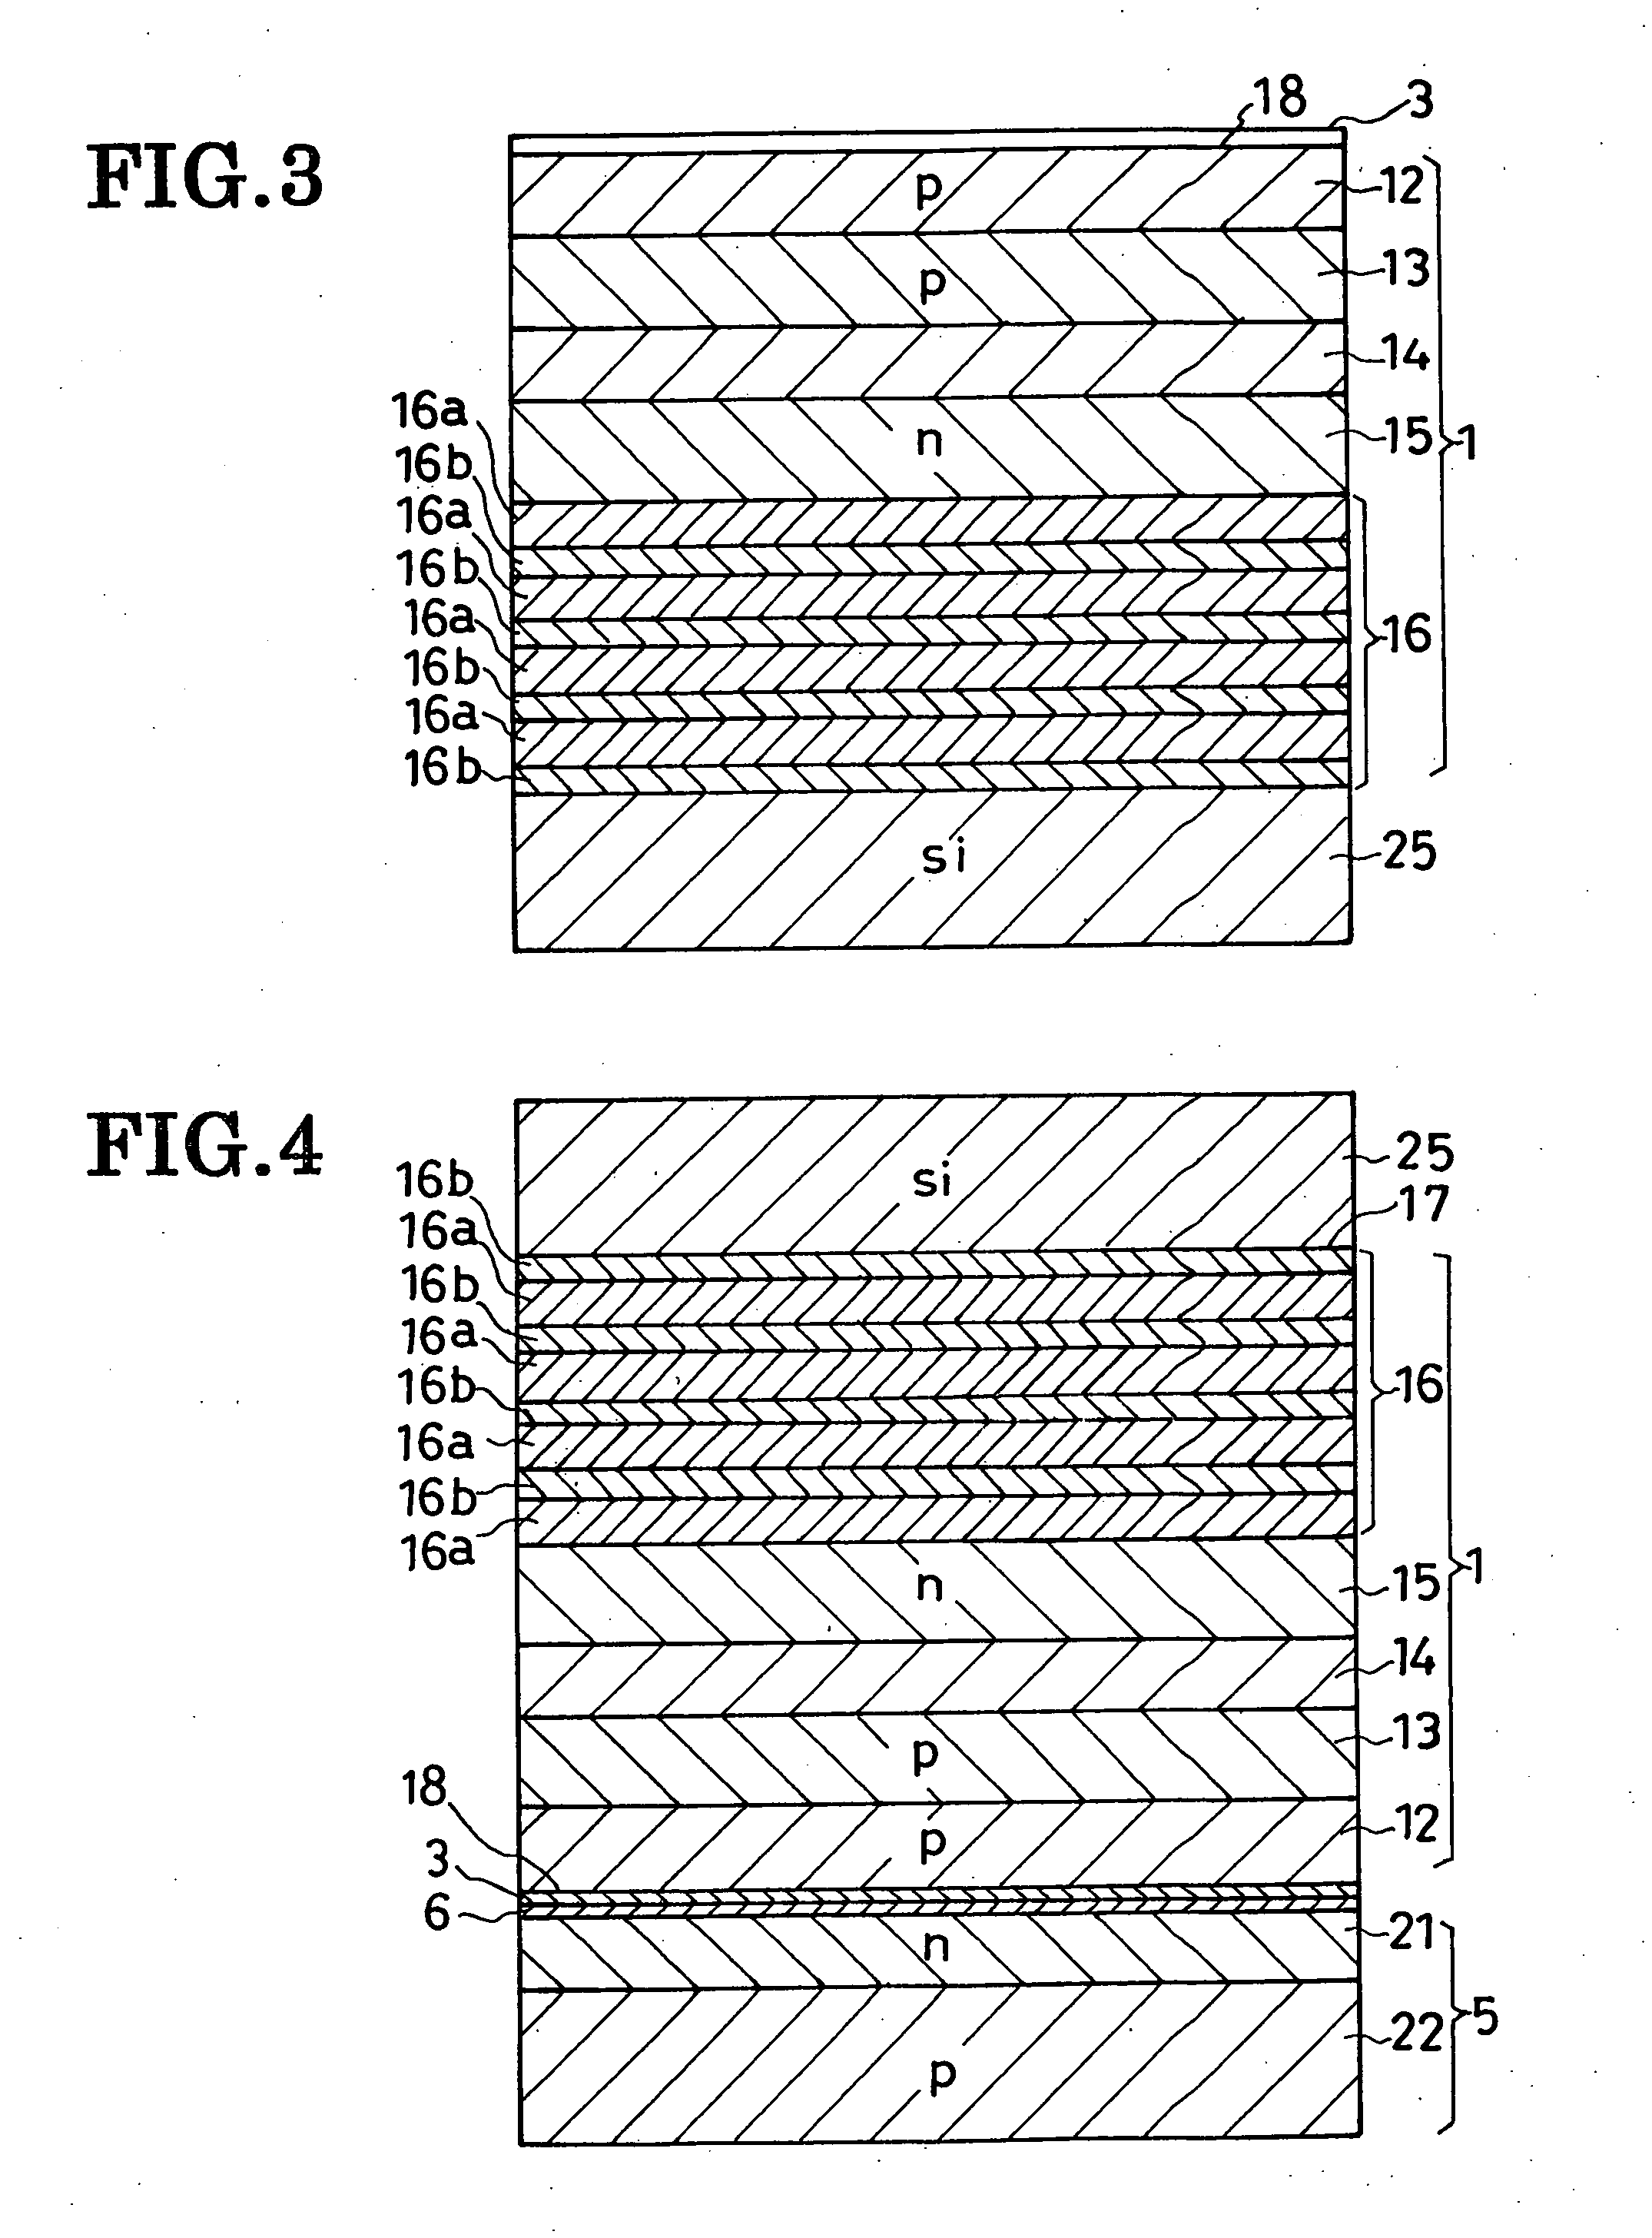 Light-emitting semiconductor device having an overvoltage protector, and method of fabrication